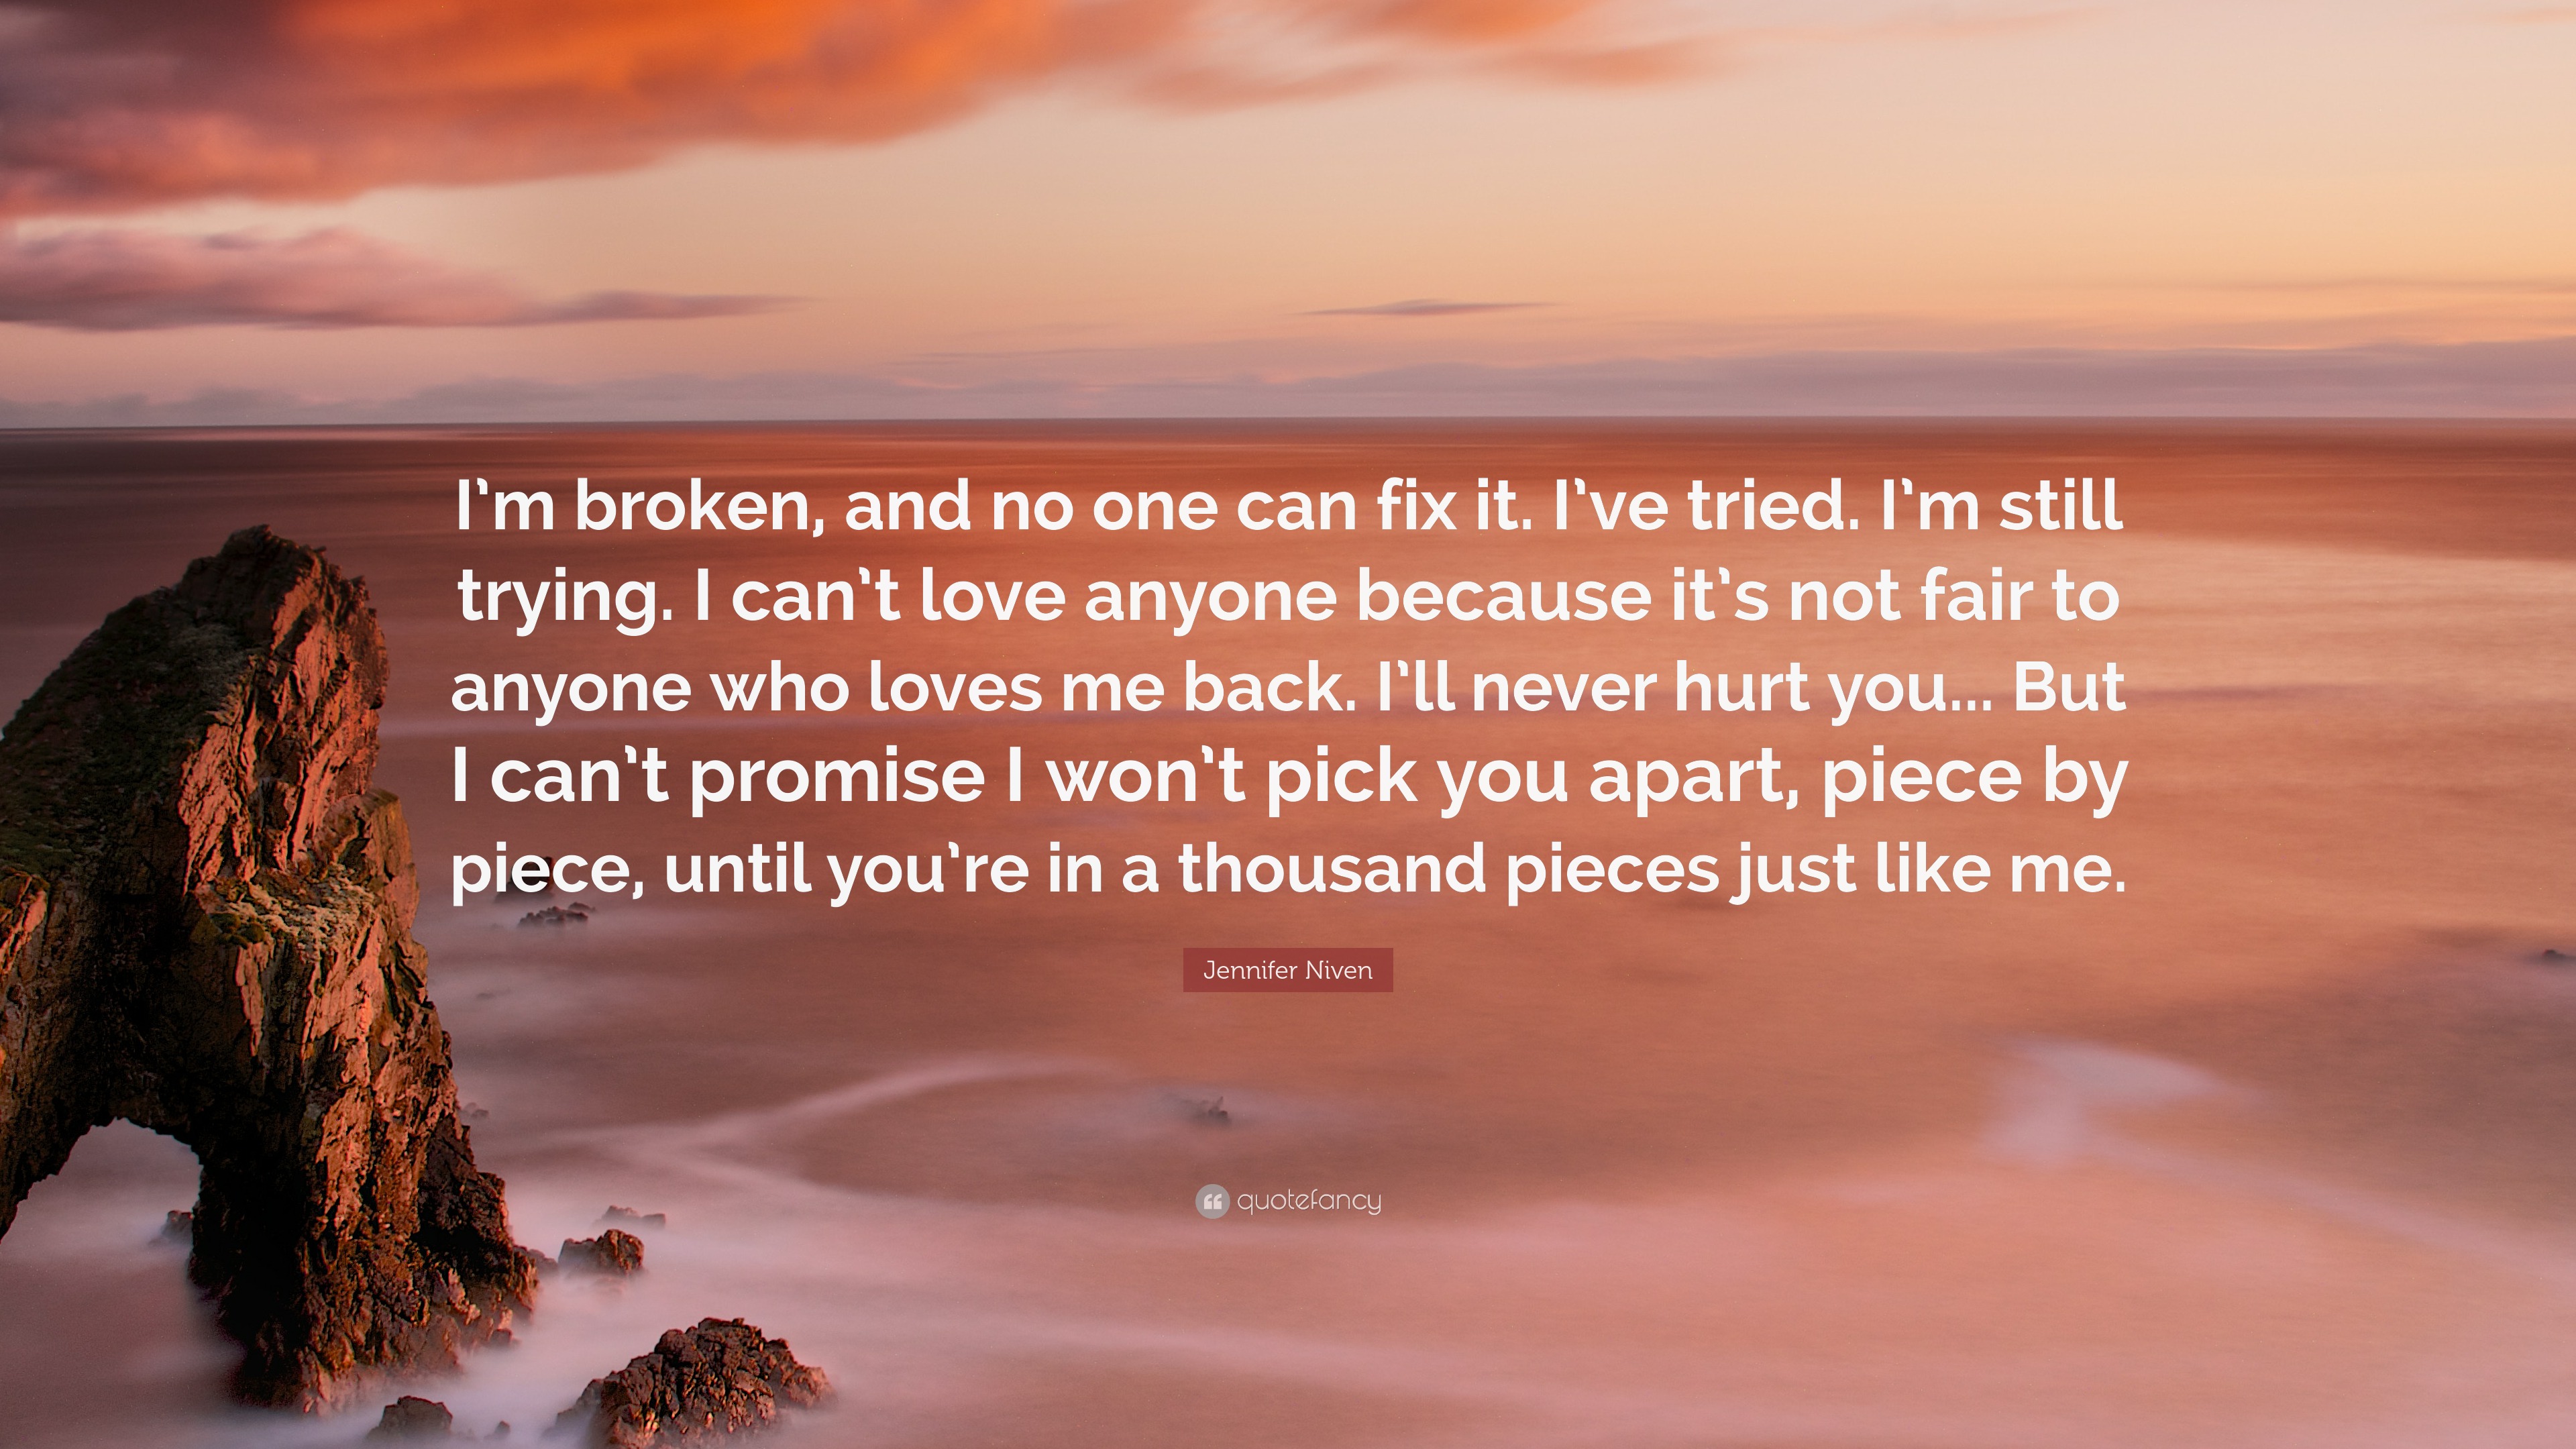 Jennifer Niven Quote: “I'm broken, and no one can fix it. I've tried. I'm  still trying. I can't love anyone because it's not fair to anyone who...”